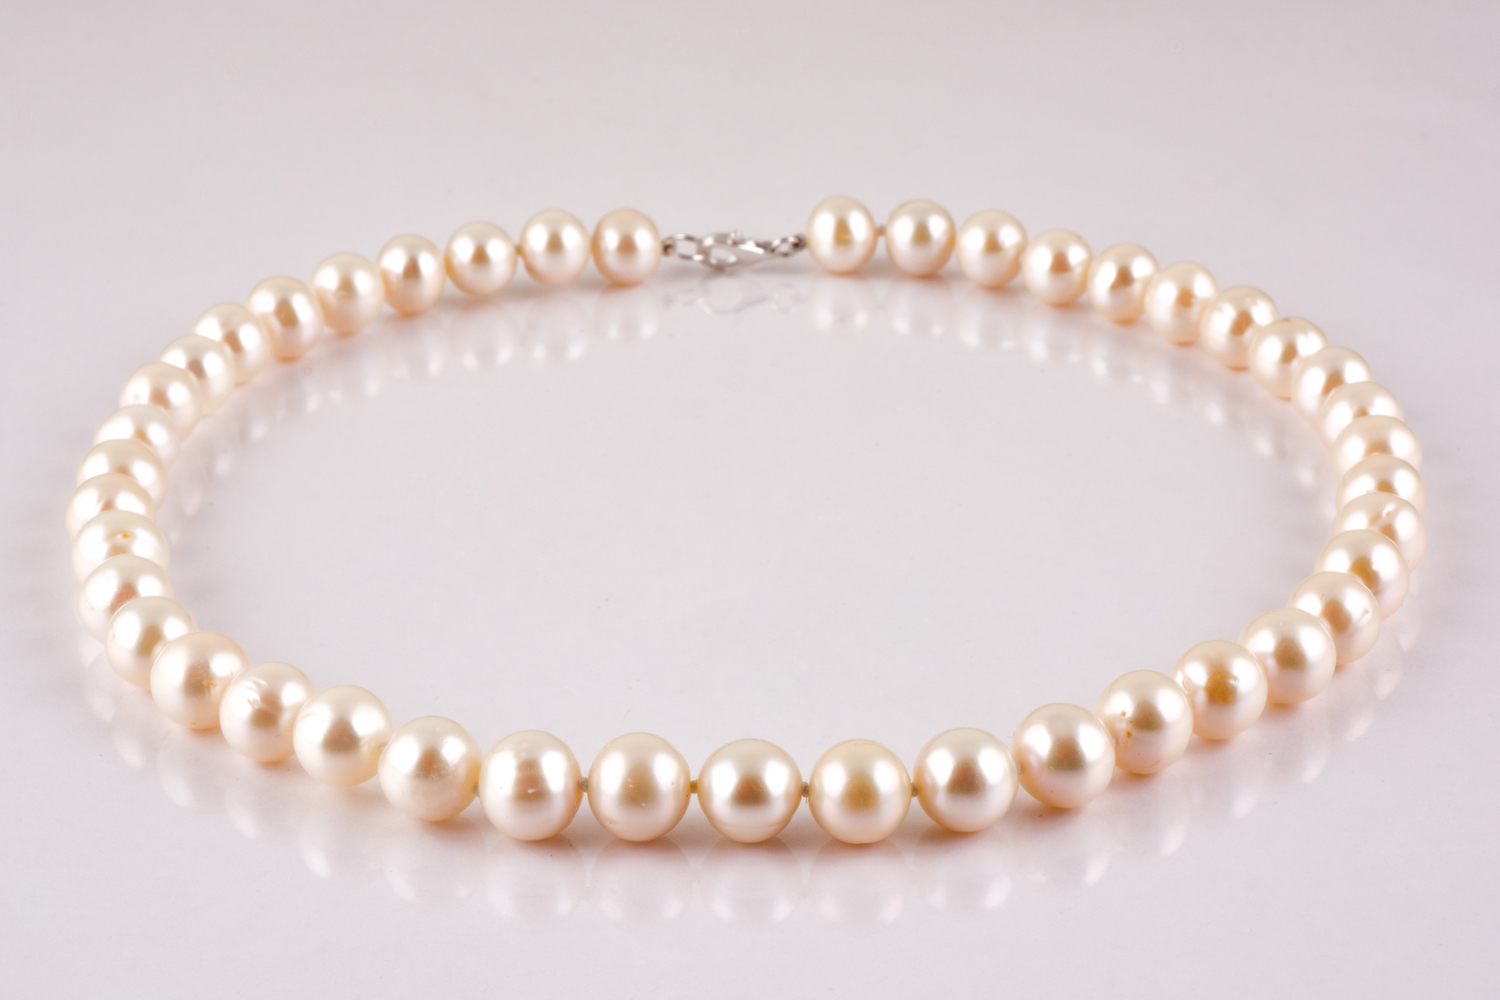 SPECIAL DISCOUNTS ON PEARLS